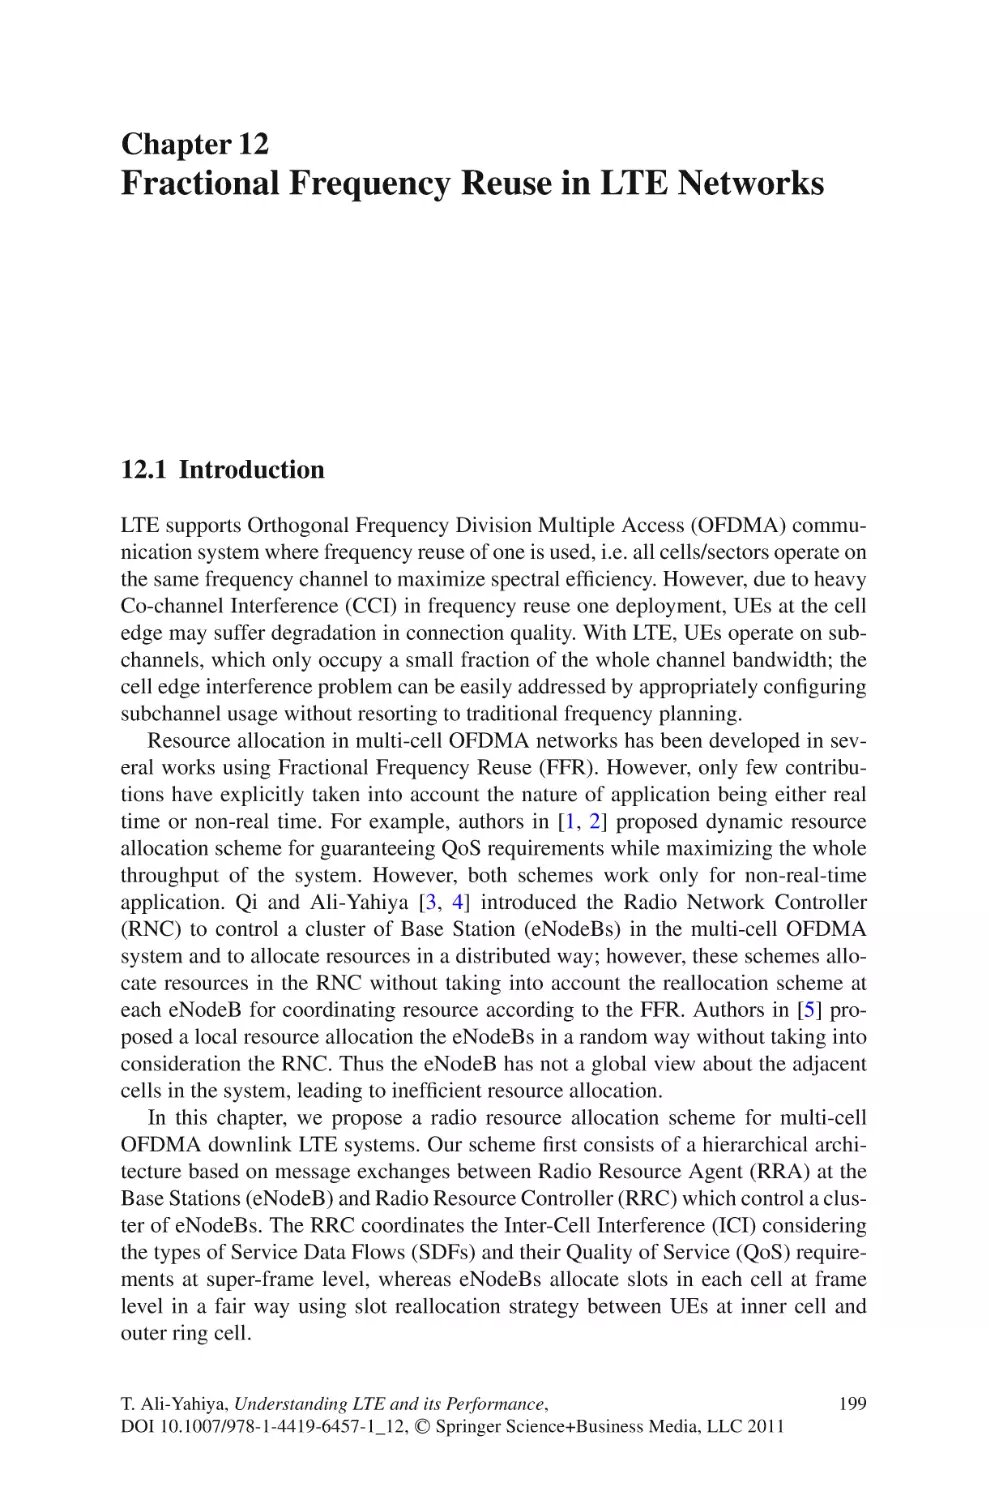 12  Fractional Frequency Reuse in LTE Networks
12.1  Introduction